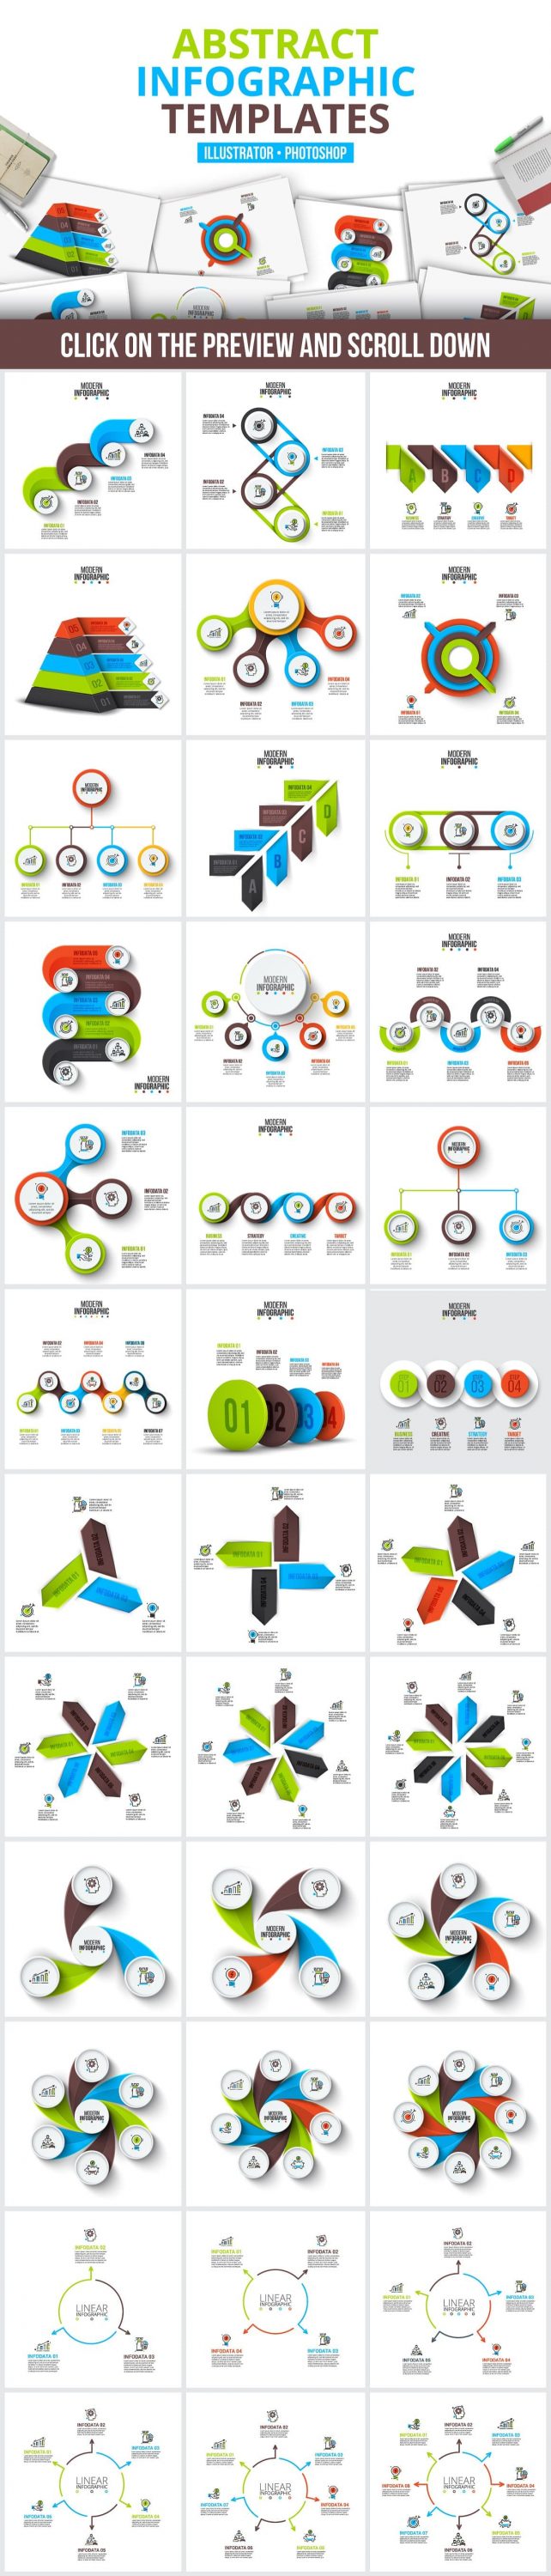 Abstract Infographic Templates Massive Animated PowerPoint Bundle.